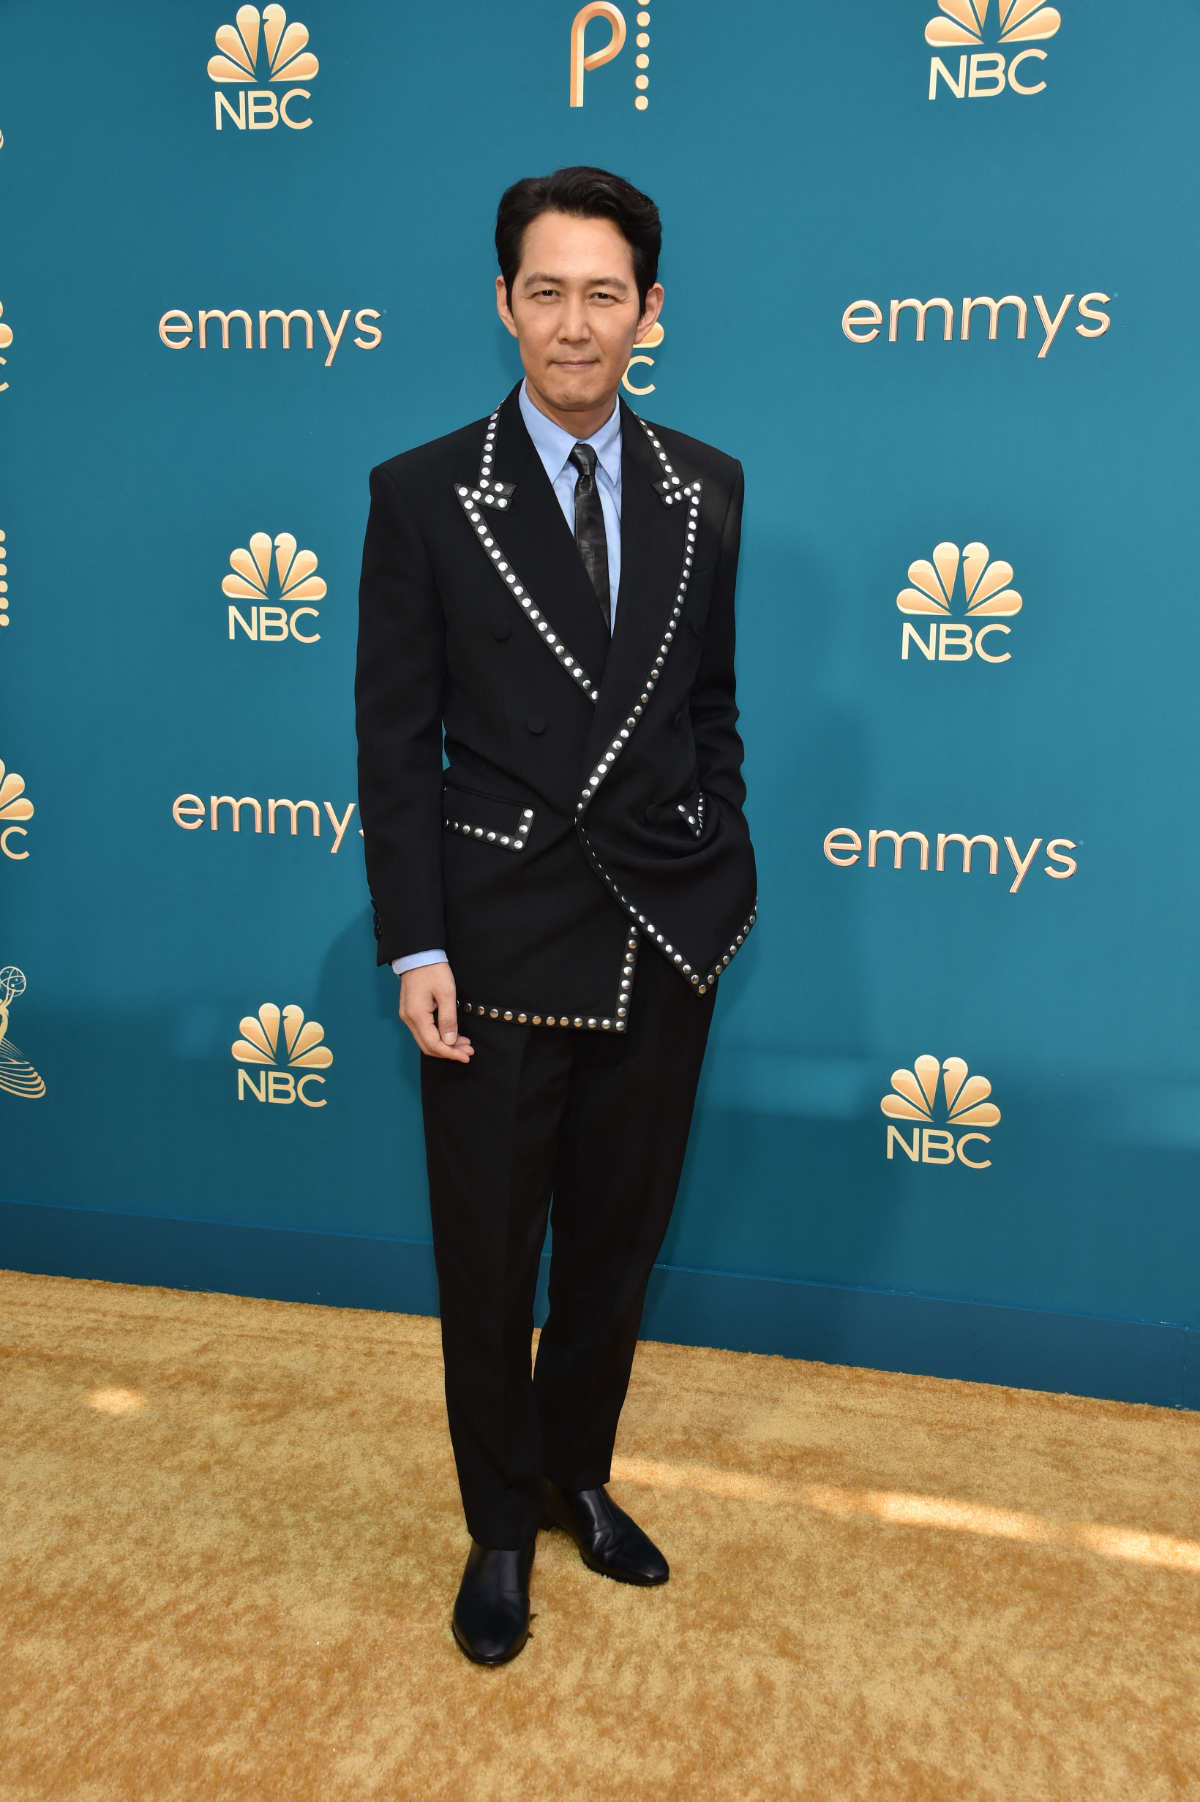 Gucci Dressed Select Nominees And Attendees For The 74th Annual Primetime Emmy Awards